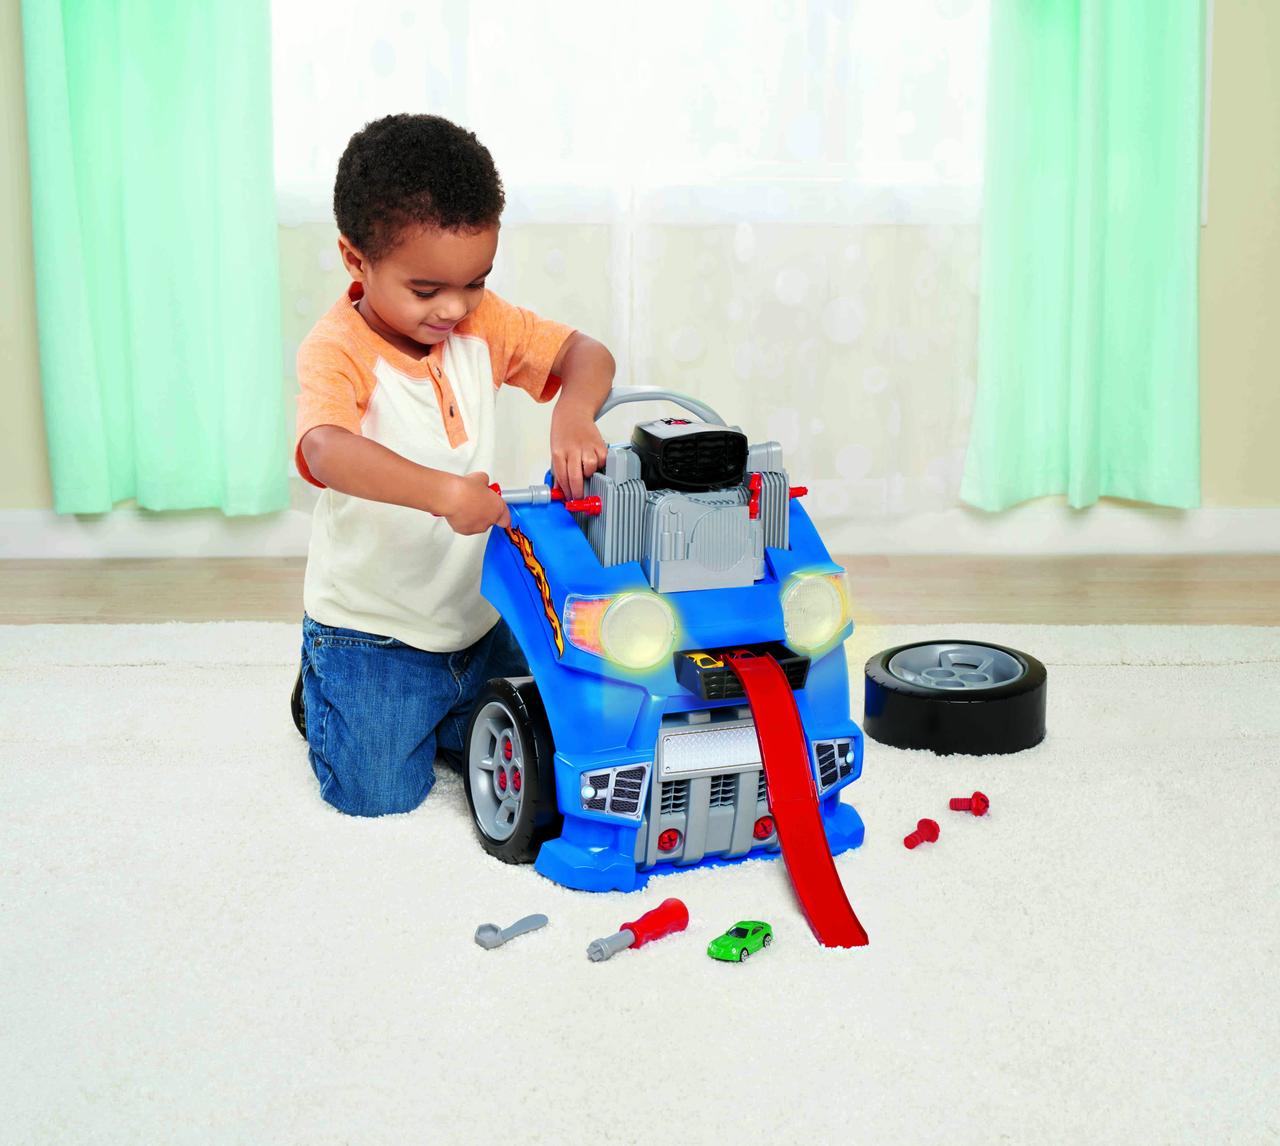 Kid Connection Car Engine And Race Track Set - image 1 of 2